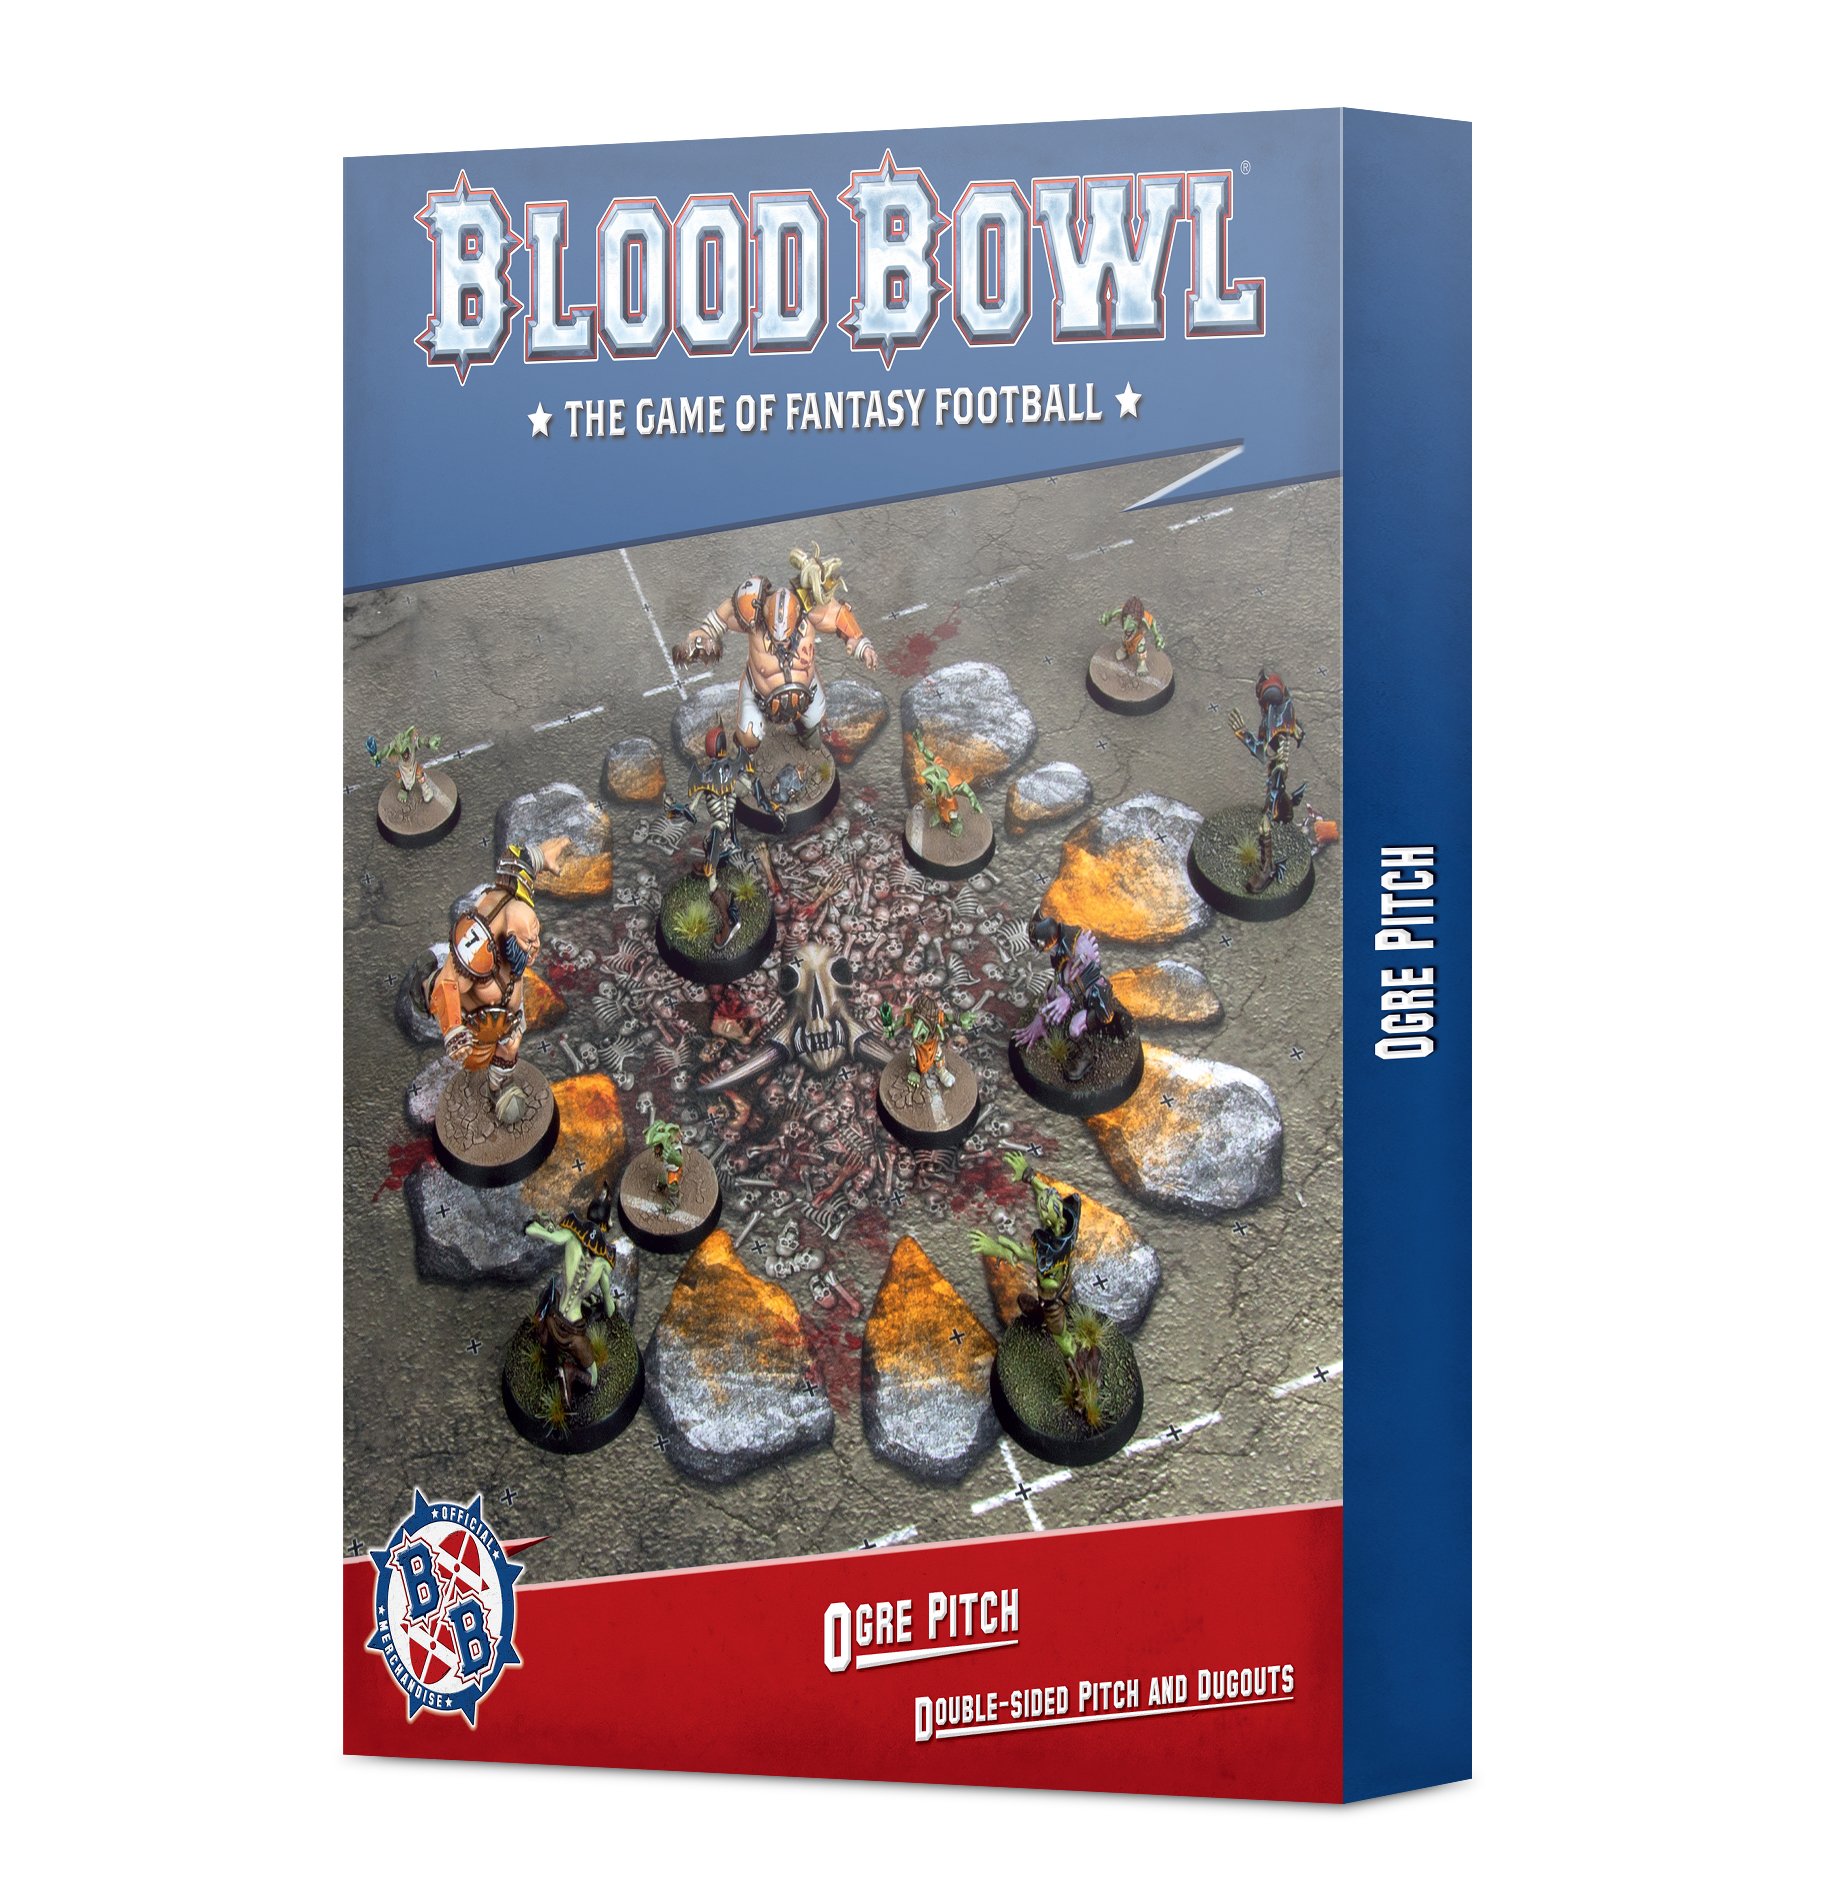 blood-bowl-ogre-team-pitch-dugouts-ontabletop-store